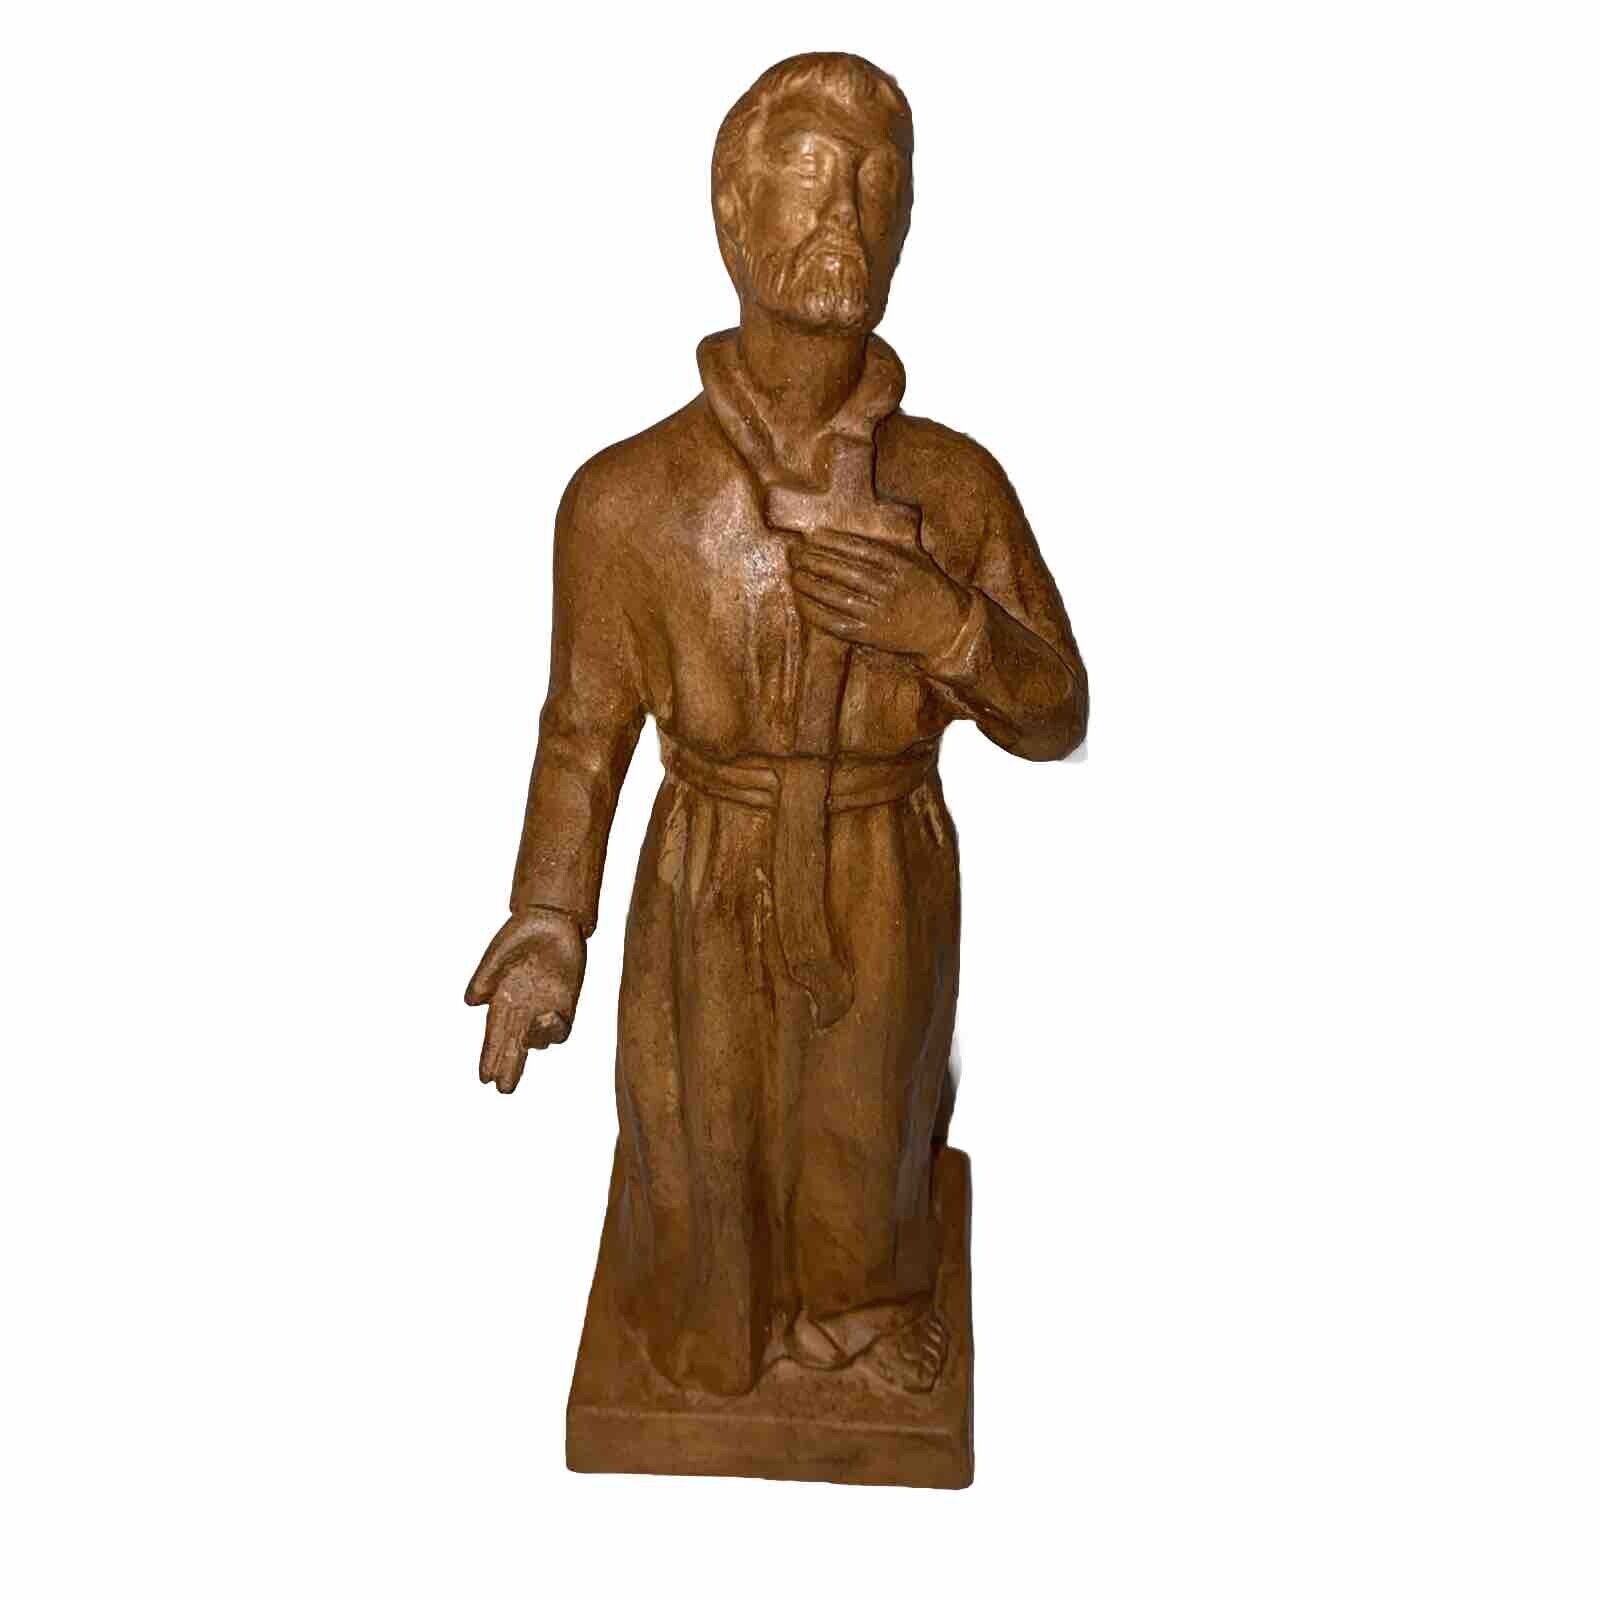 St. Saint Francis of Assisi Patron Saint Terracotta Statue 8.5” made in Spain